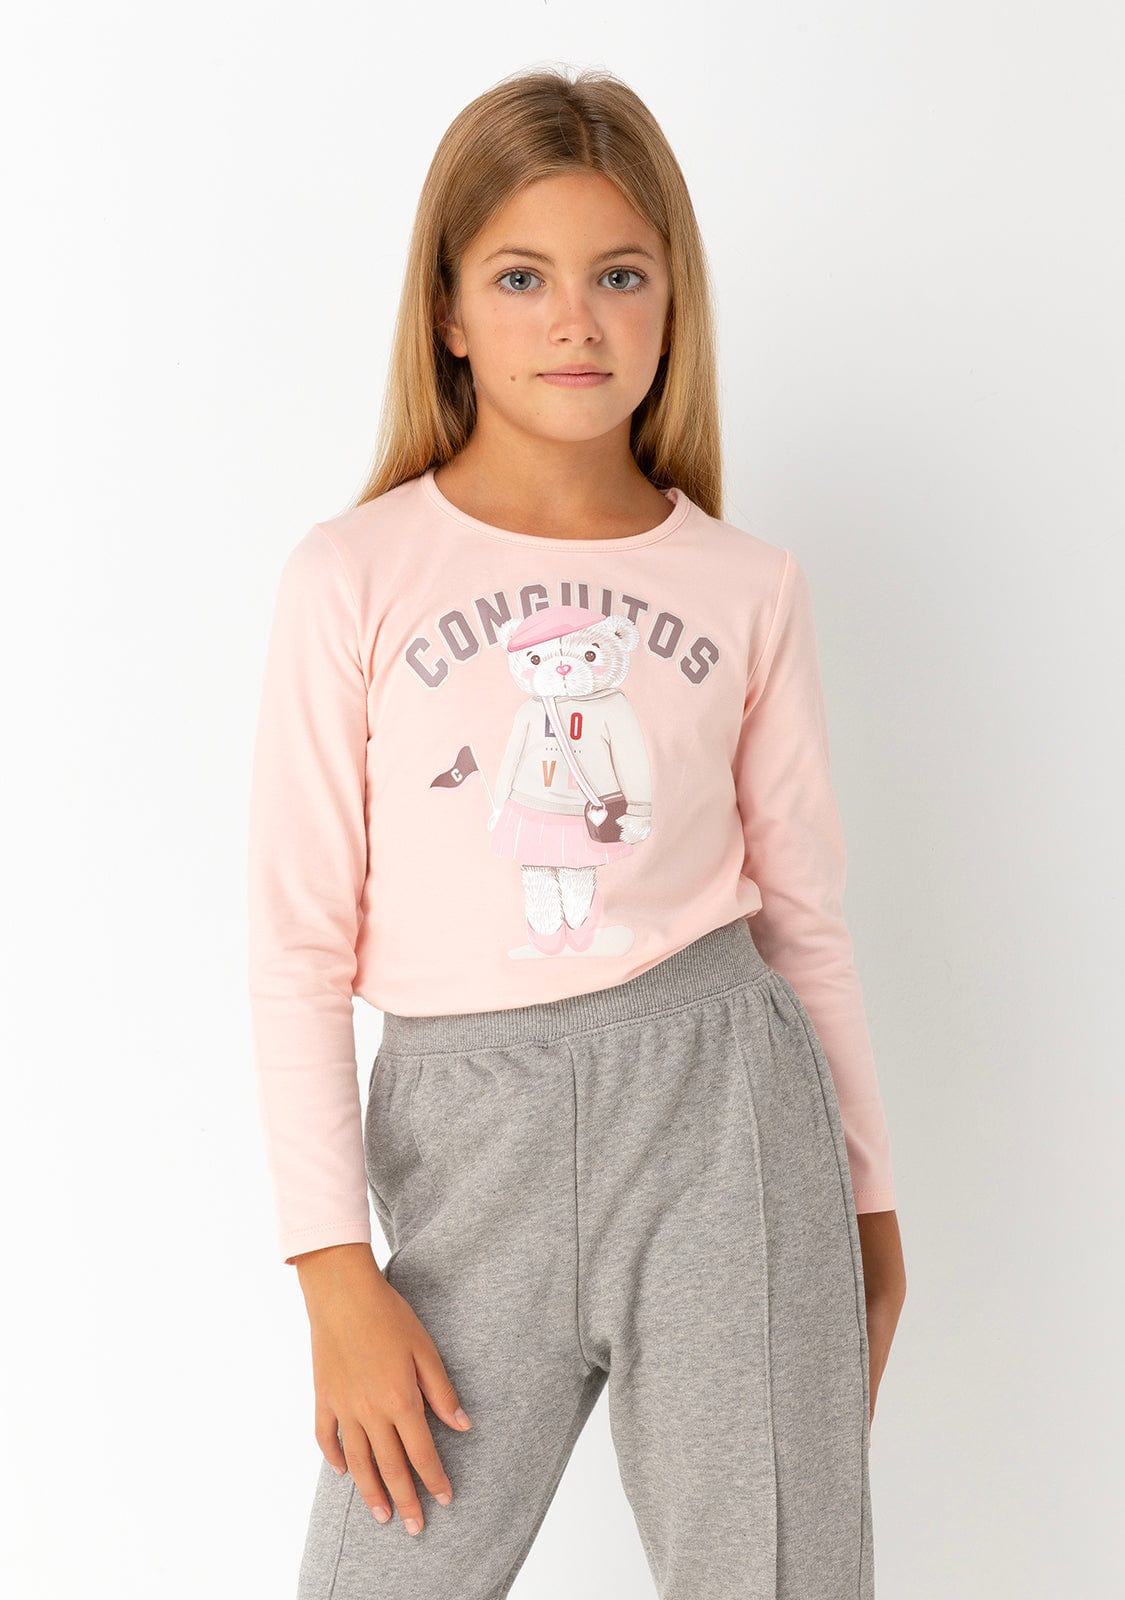 CONGUITOS TEXTIL Clothing Girl's Pink Teddy University T-Shirt